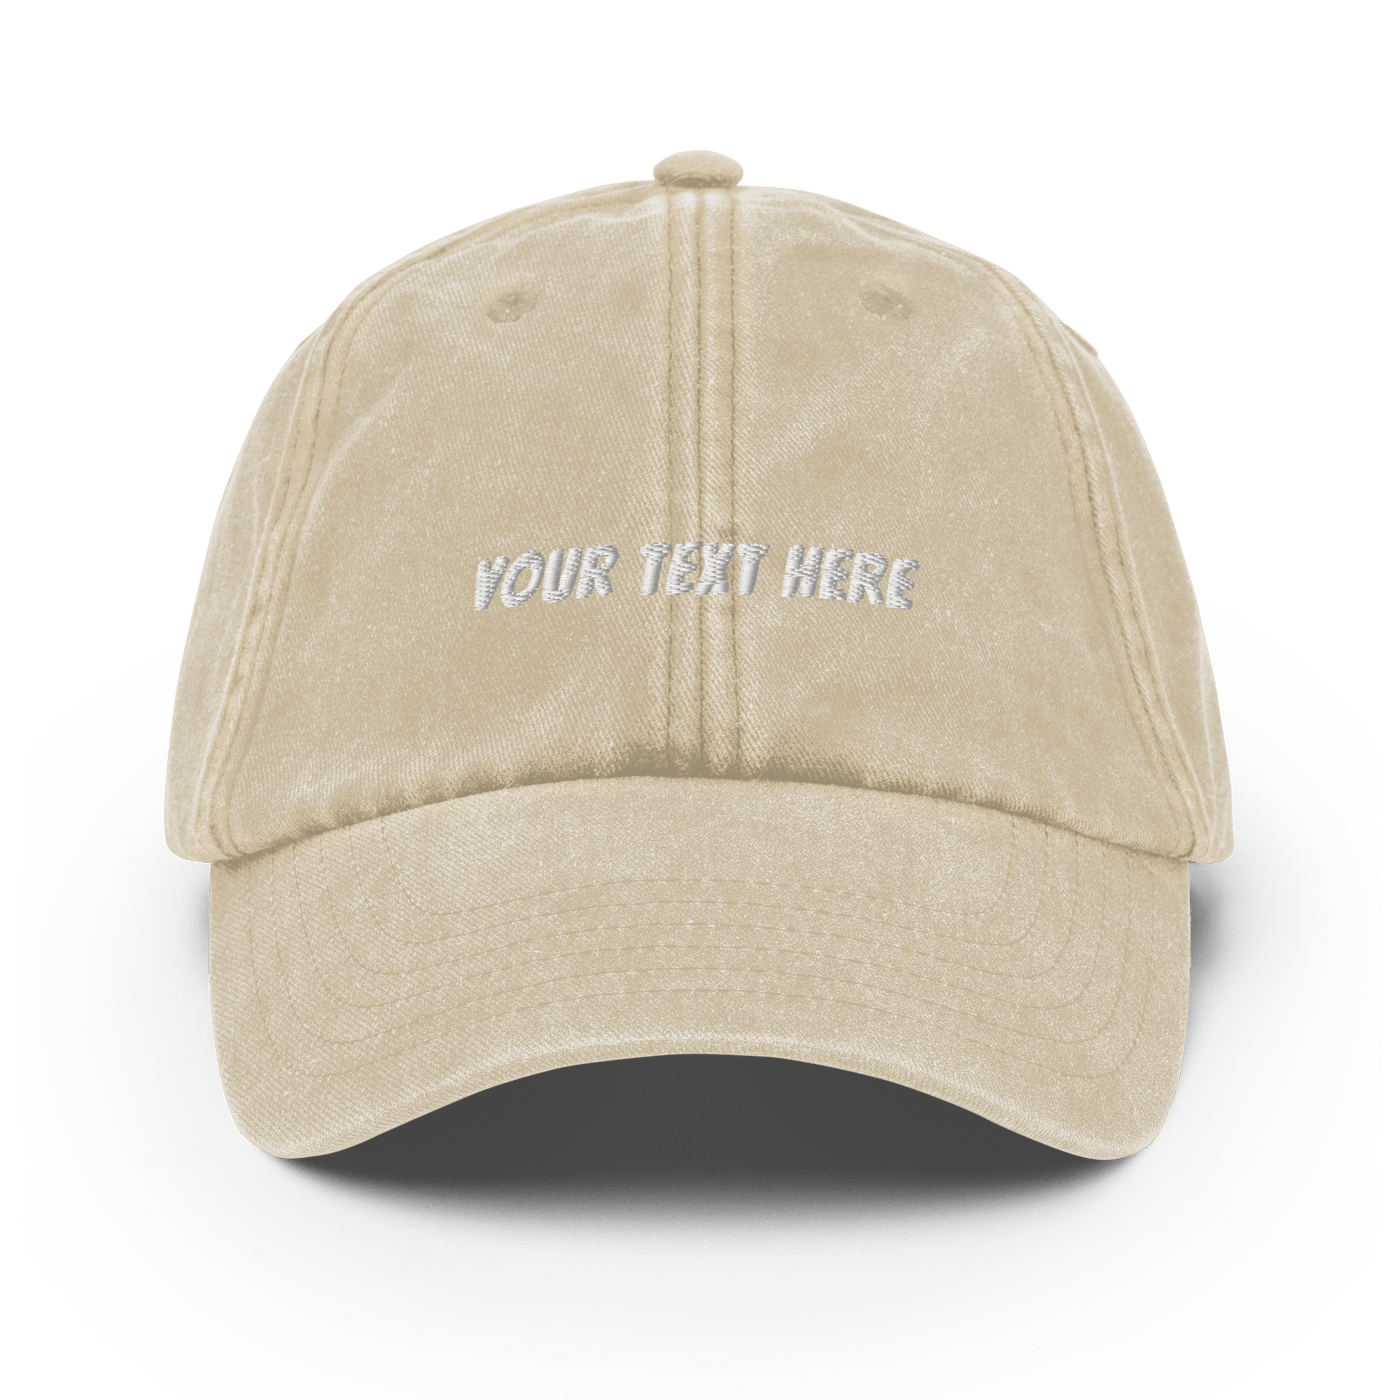 Customize Your own Vintage Hat - Banger Font - Vintage Stone - - Just Another Cap Store